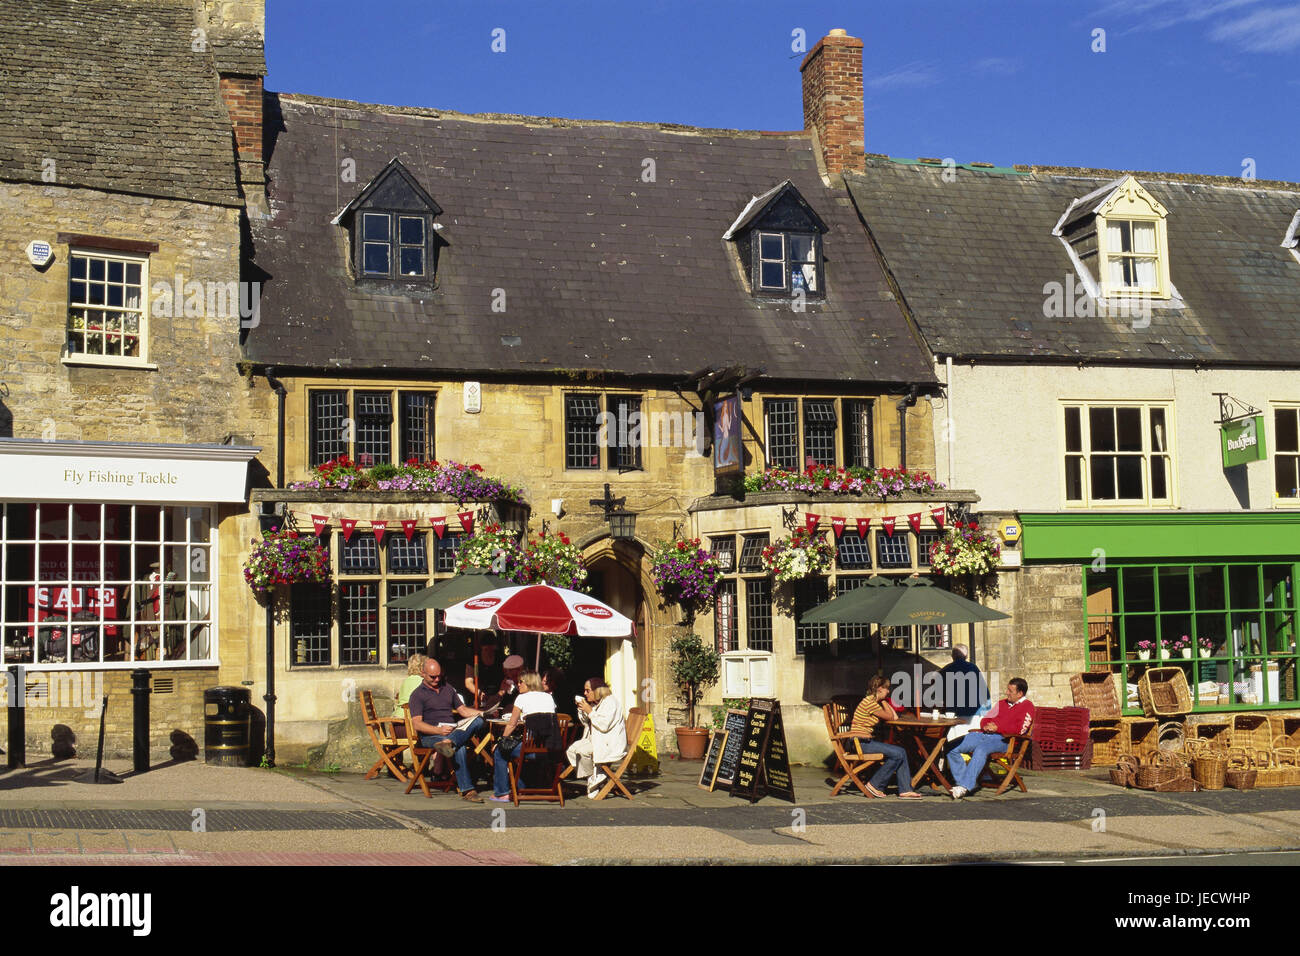 Great Britain, England, Oxfordshire, Cotswolds, Burford, street cafe, guests, no model release, Europe, destination, town, building, houses, terrace, architecture, cafe, bar, gastronomy, outside, sunny, people, rest, leisure time, street bar, floral decoration, sunshades, Stock Photo